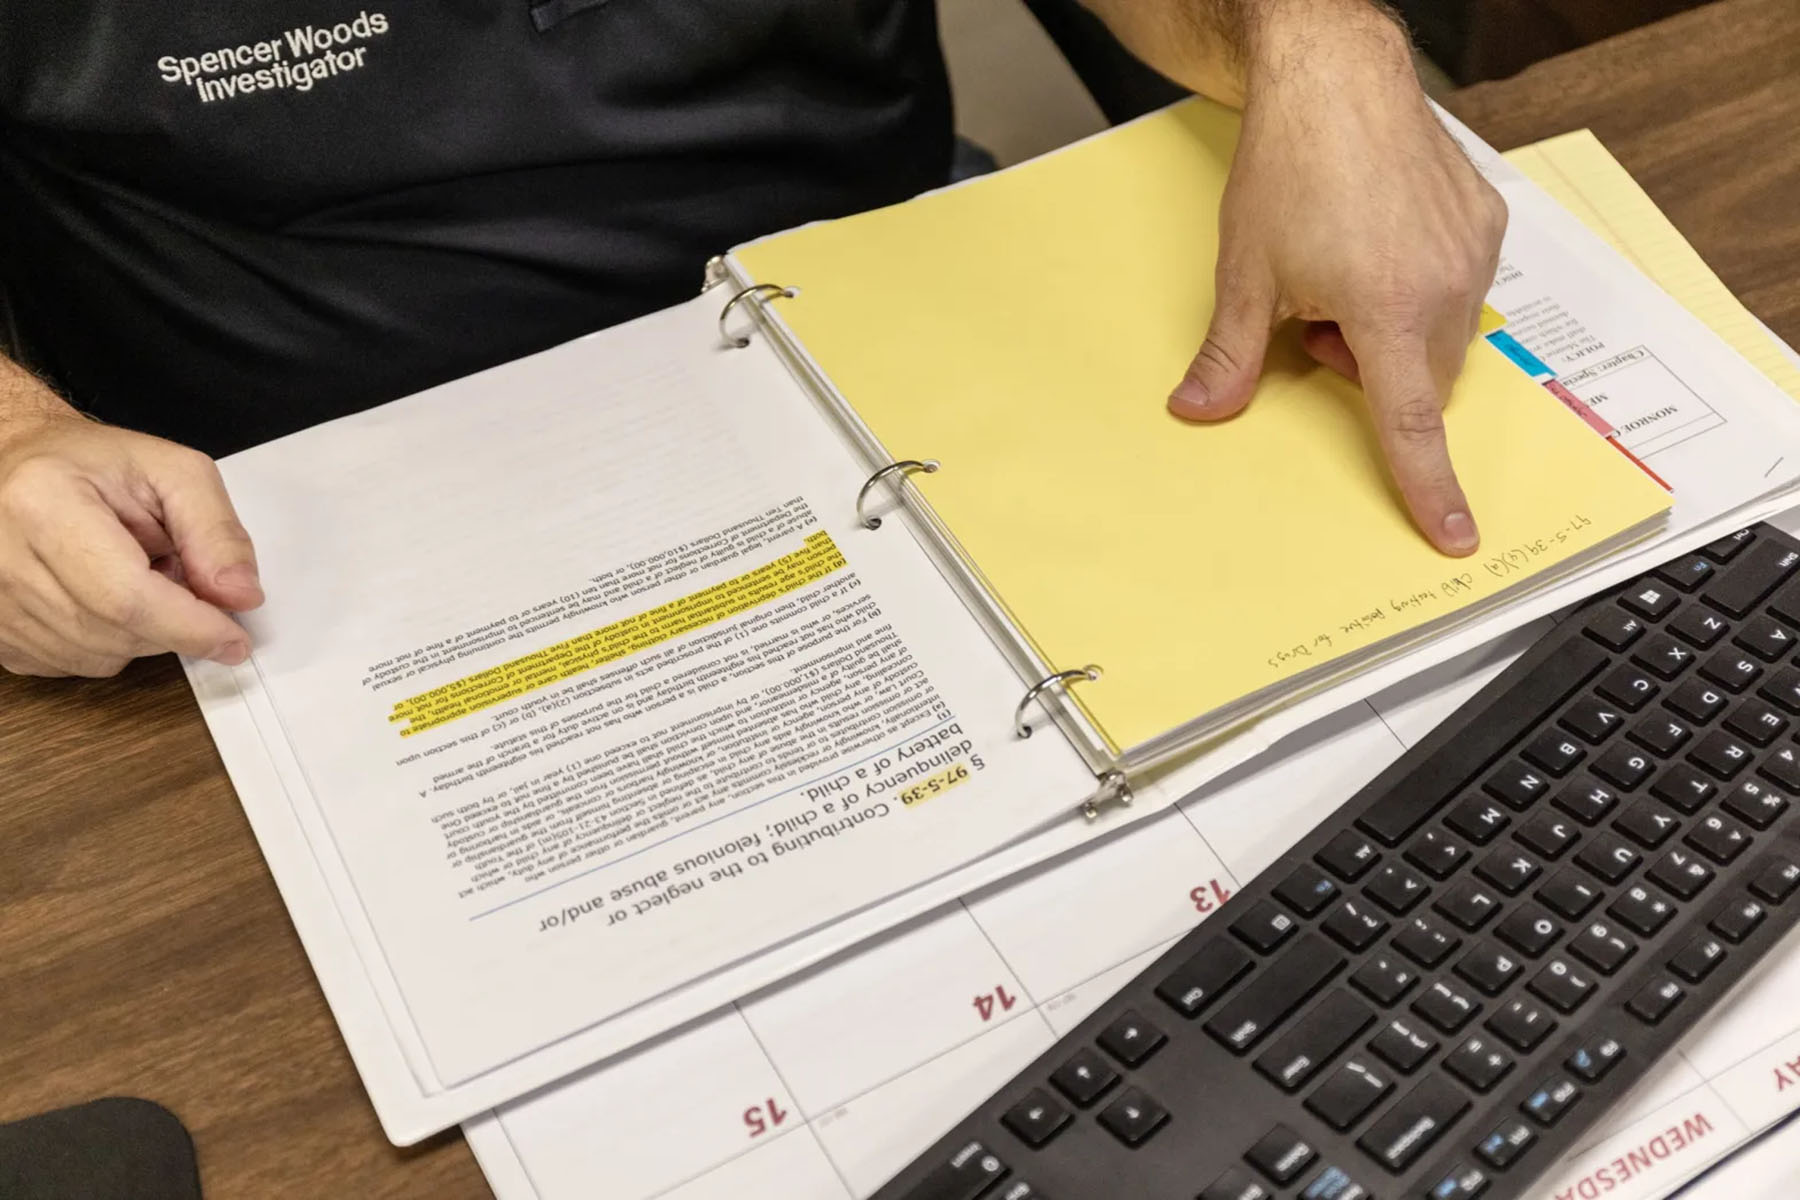 Spencer Woods points at a criminal code jotted down on a binder on his desk.